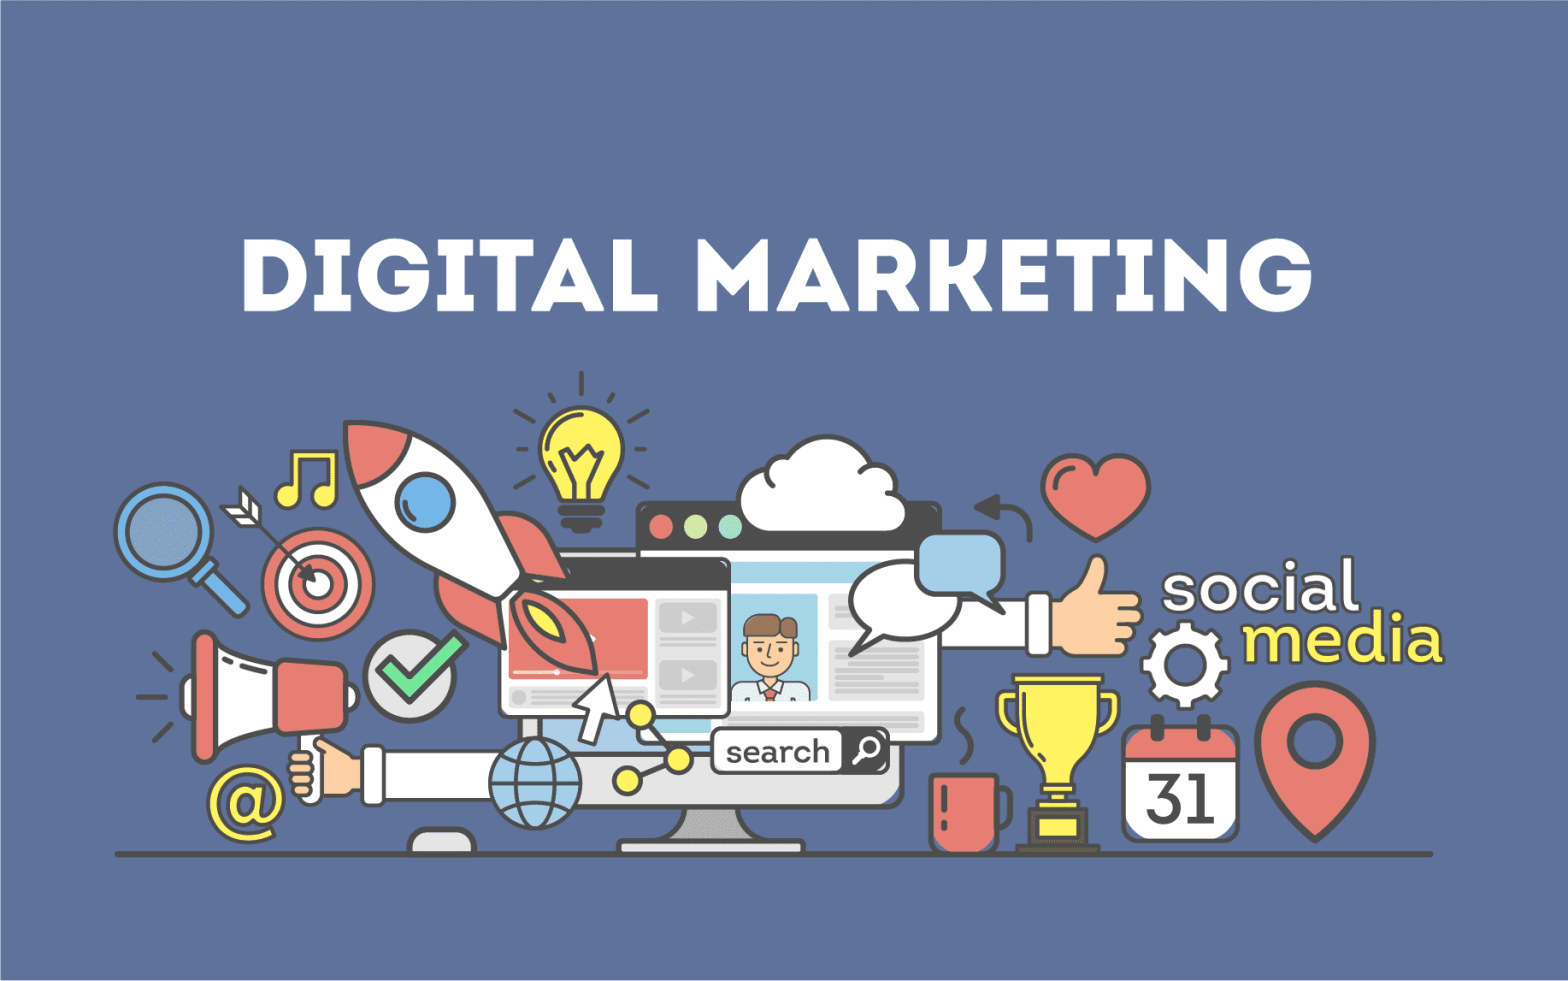 7 Types of Digital Marketing & How to Use Them